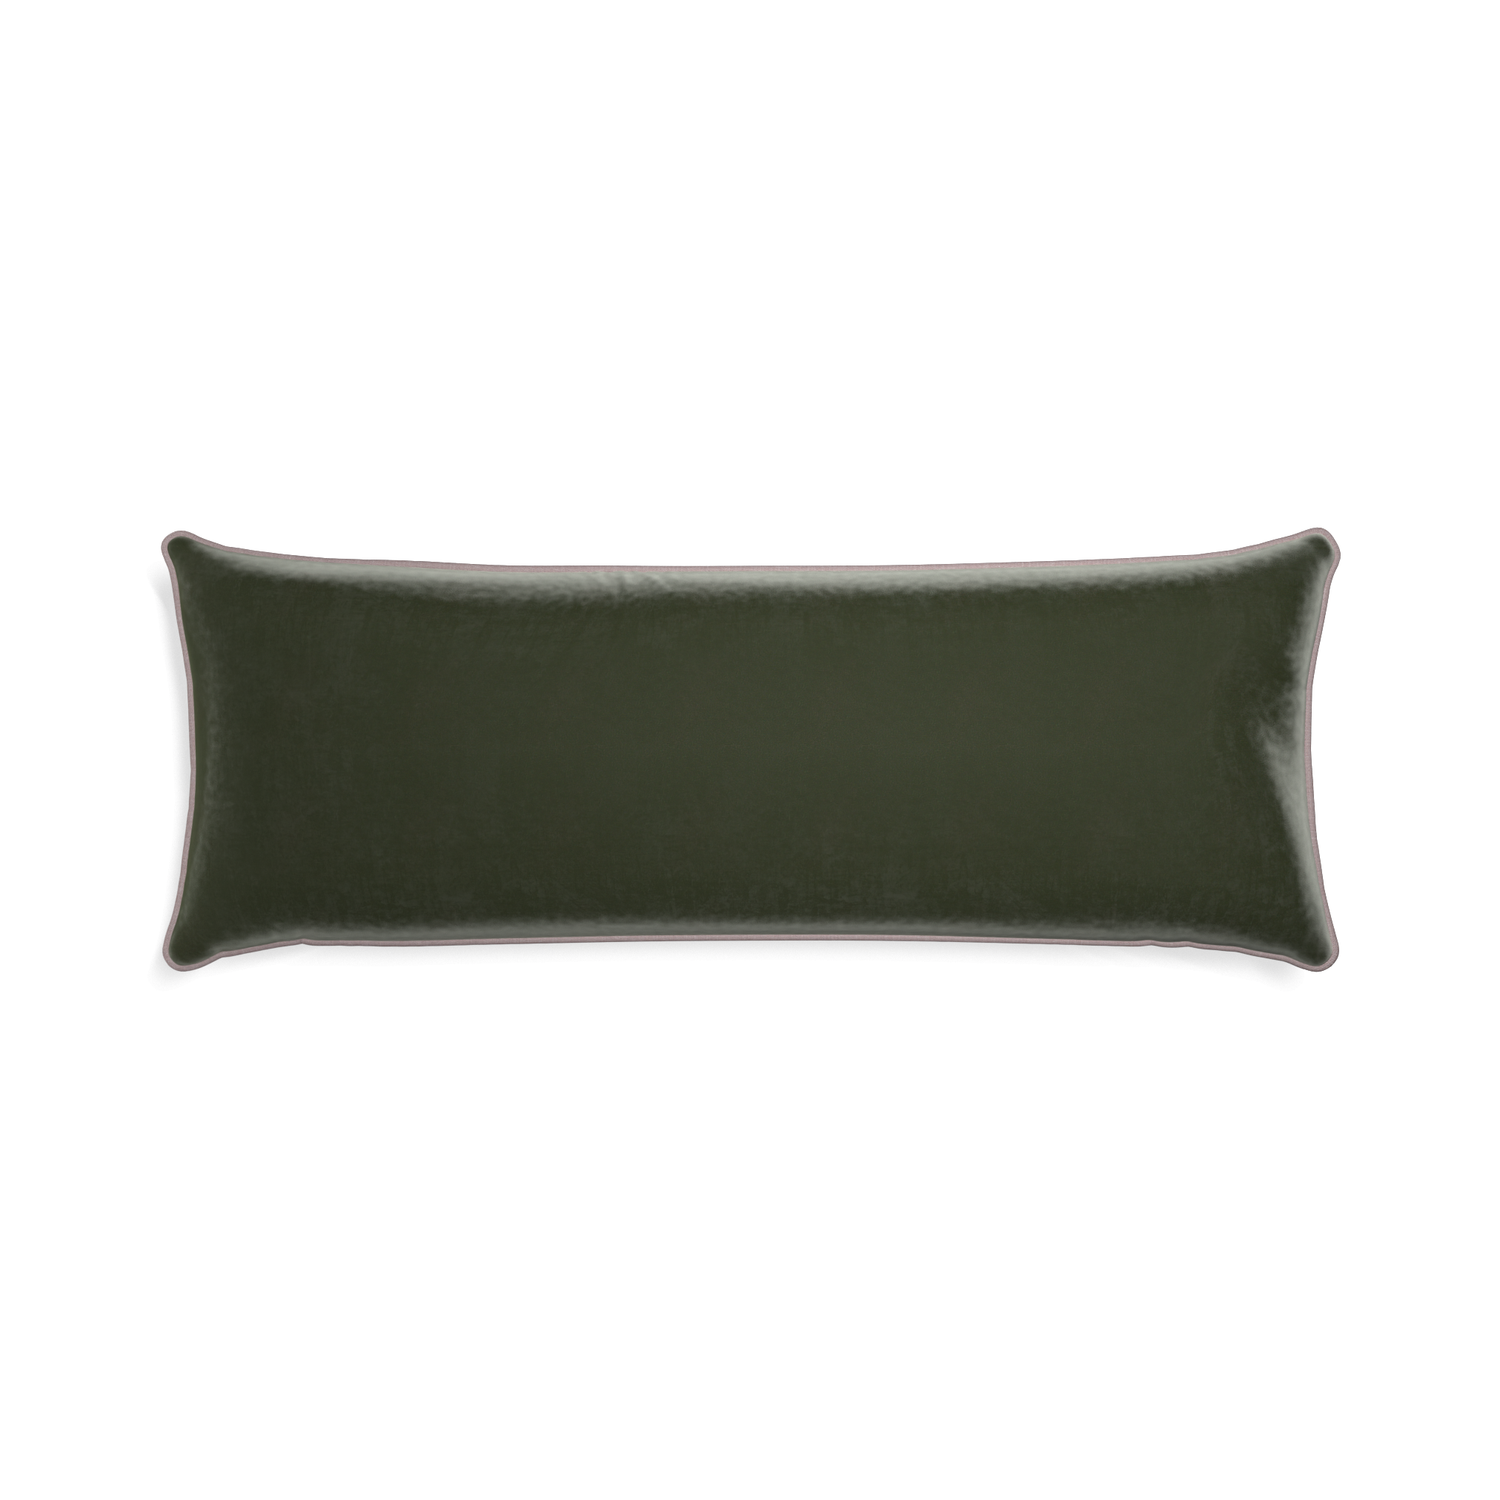 Xl-lumbar fern velvet custom fern greenpillow with orchid piping on white background